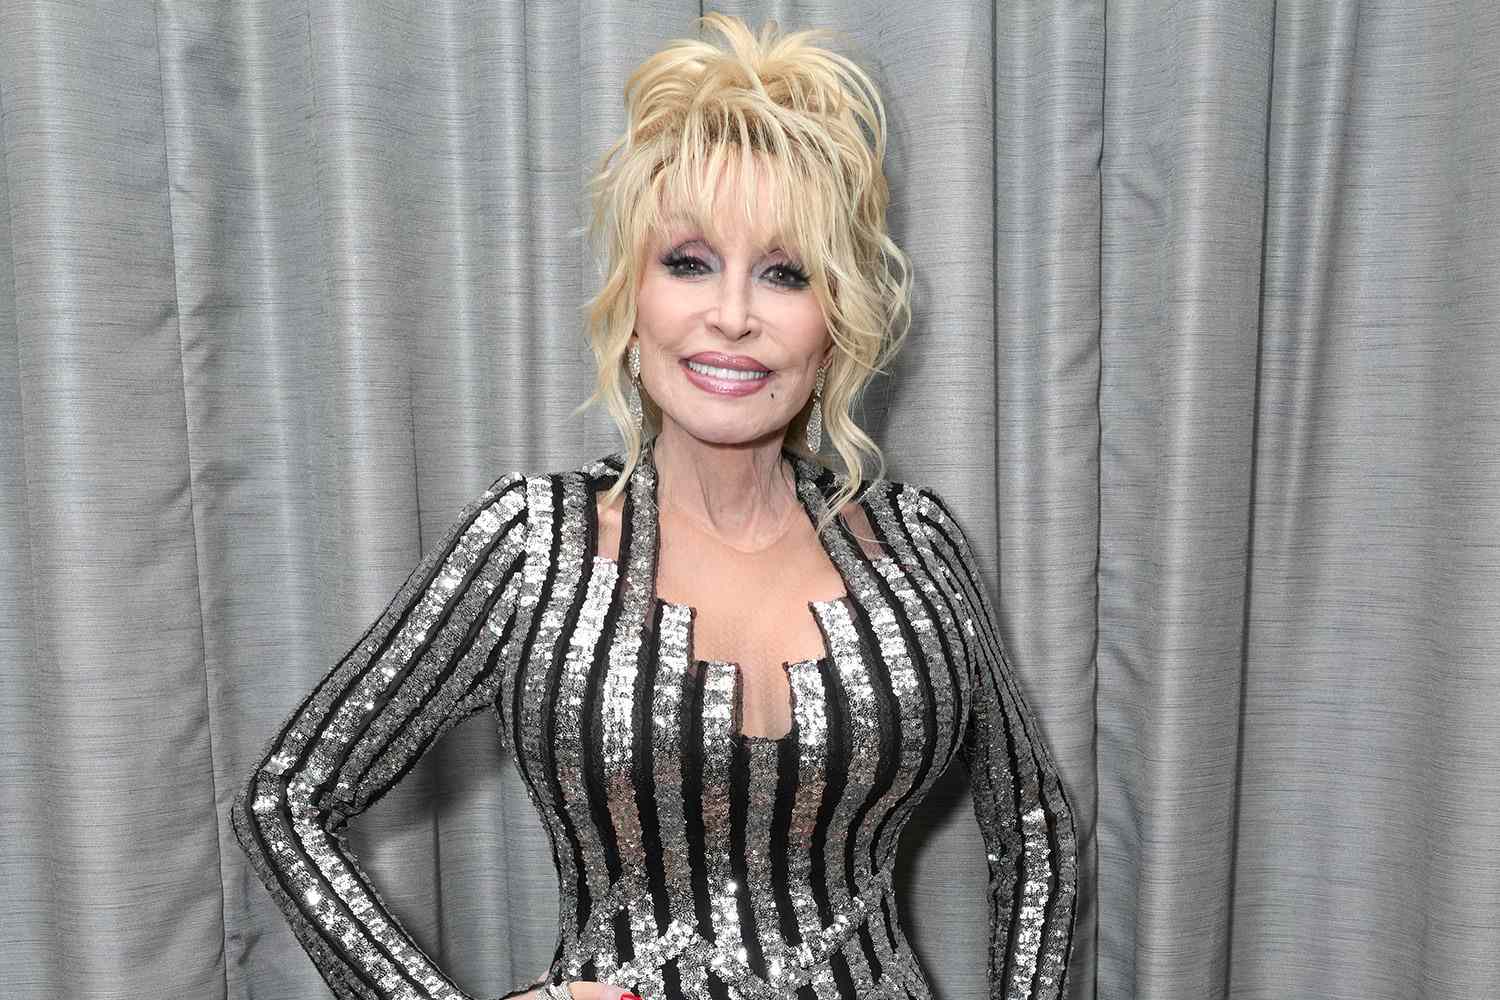 Dolly Parton attends the 37th Annual Rock & Roll Hall of Fame Induction Ceremony